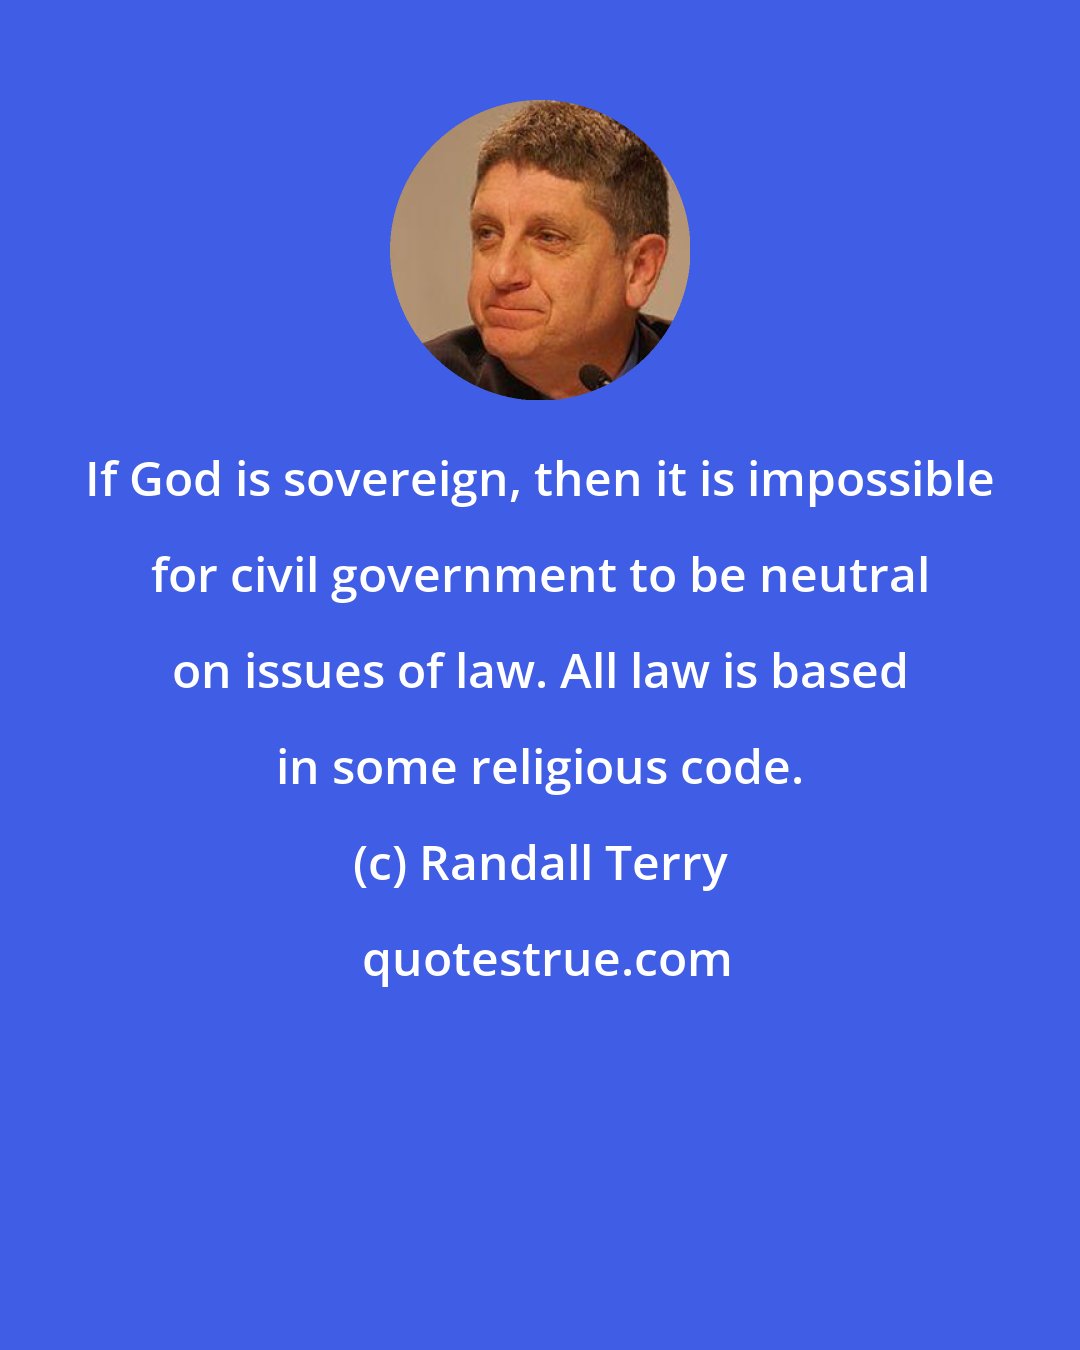 Randall Terry: If God is sovereign, then it is impossible for civil government to be neutral on issues of law. All law is based in some religious code.